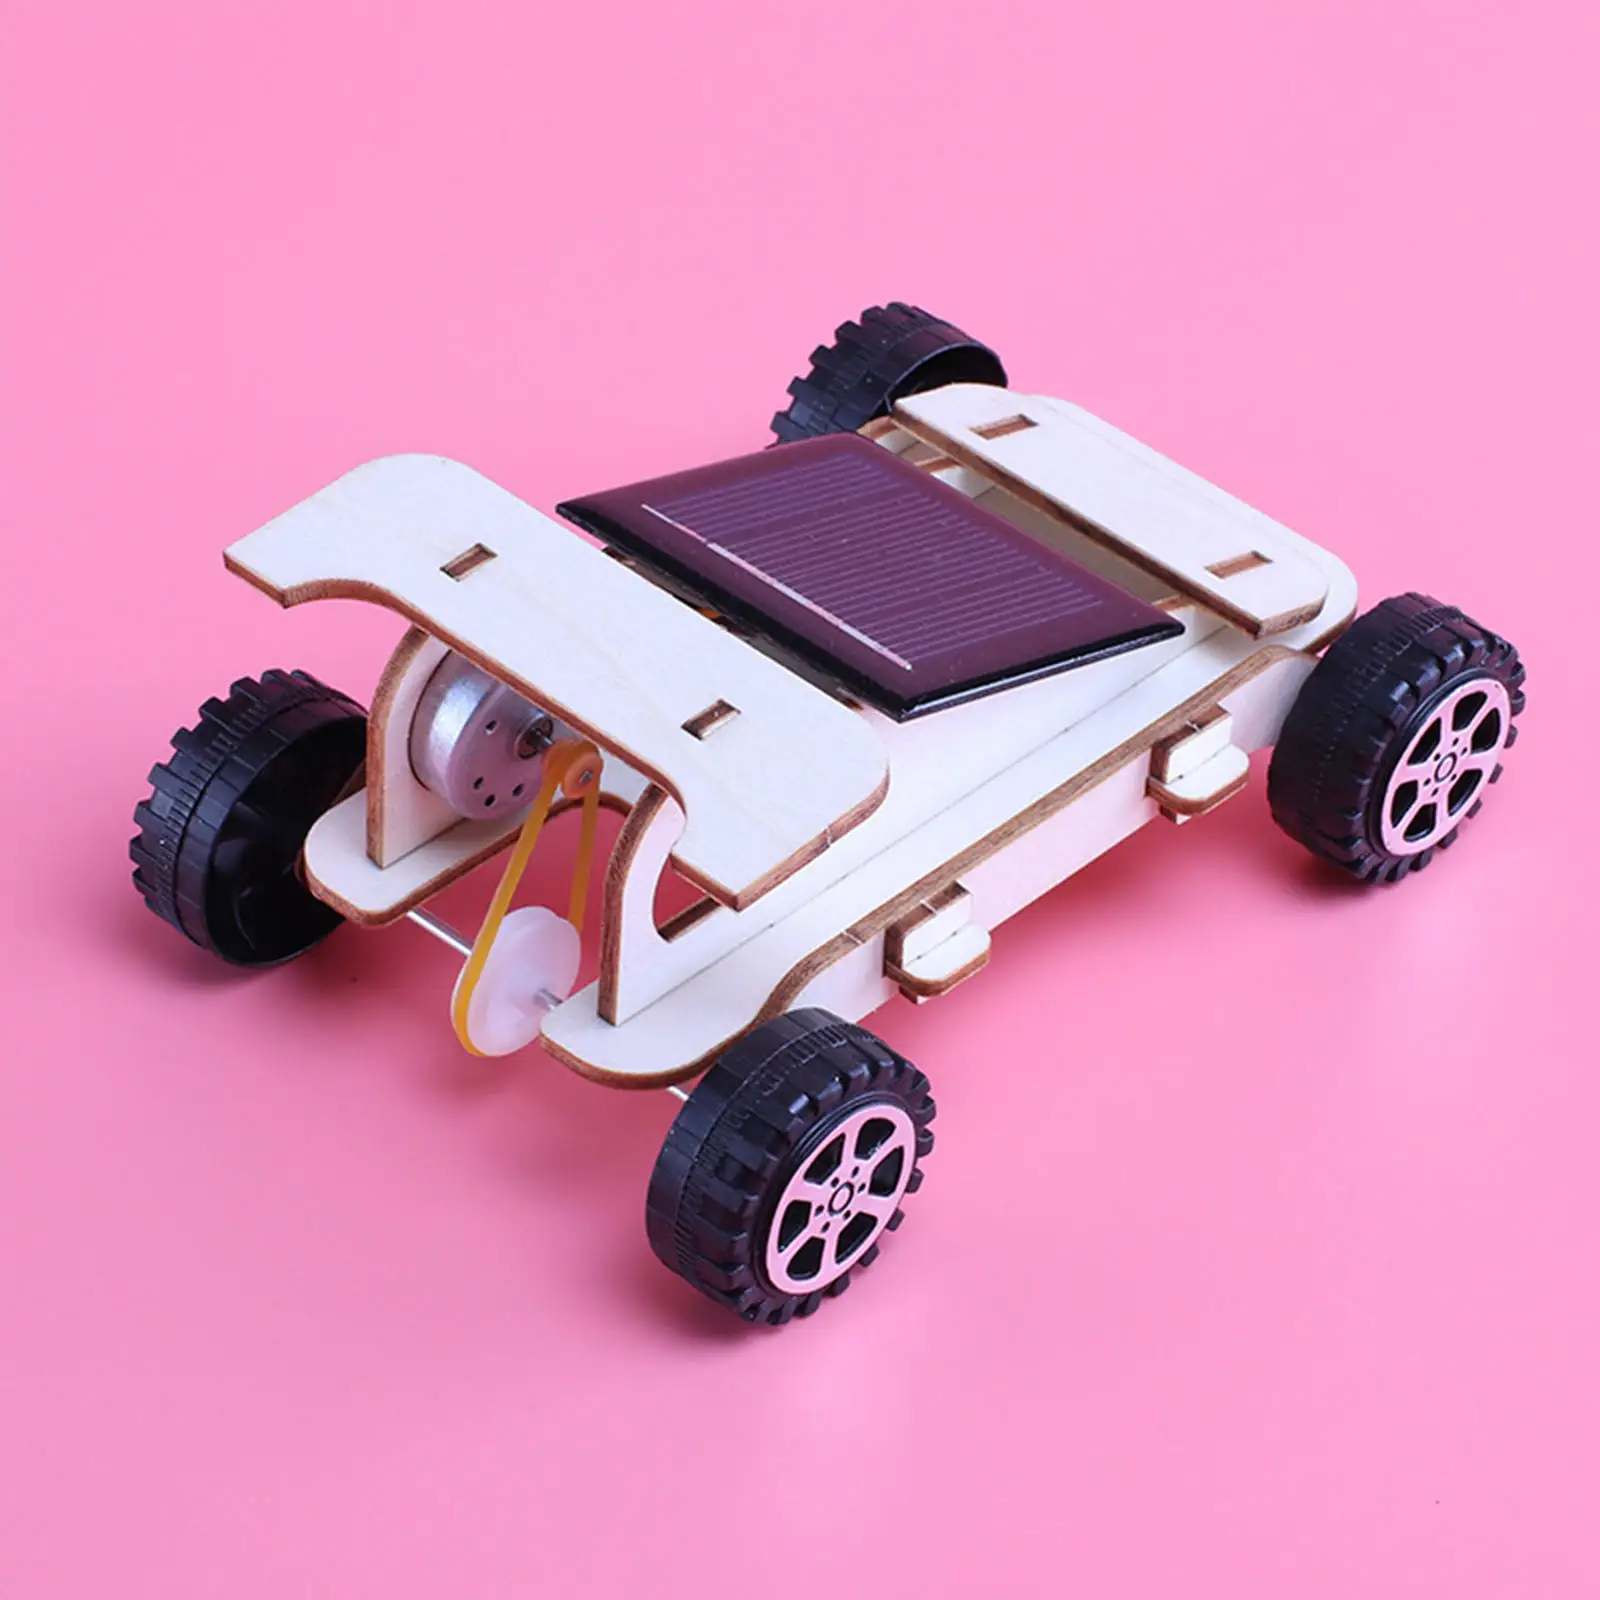 Novelty Gift 3D Puzzle Racing Car Miniature Model DIY Assemble Educational Toy